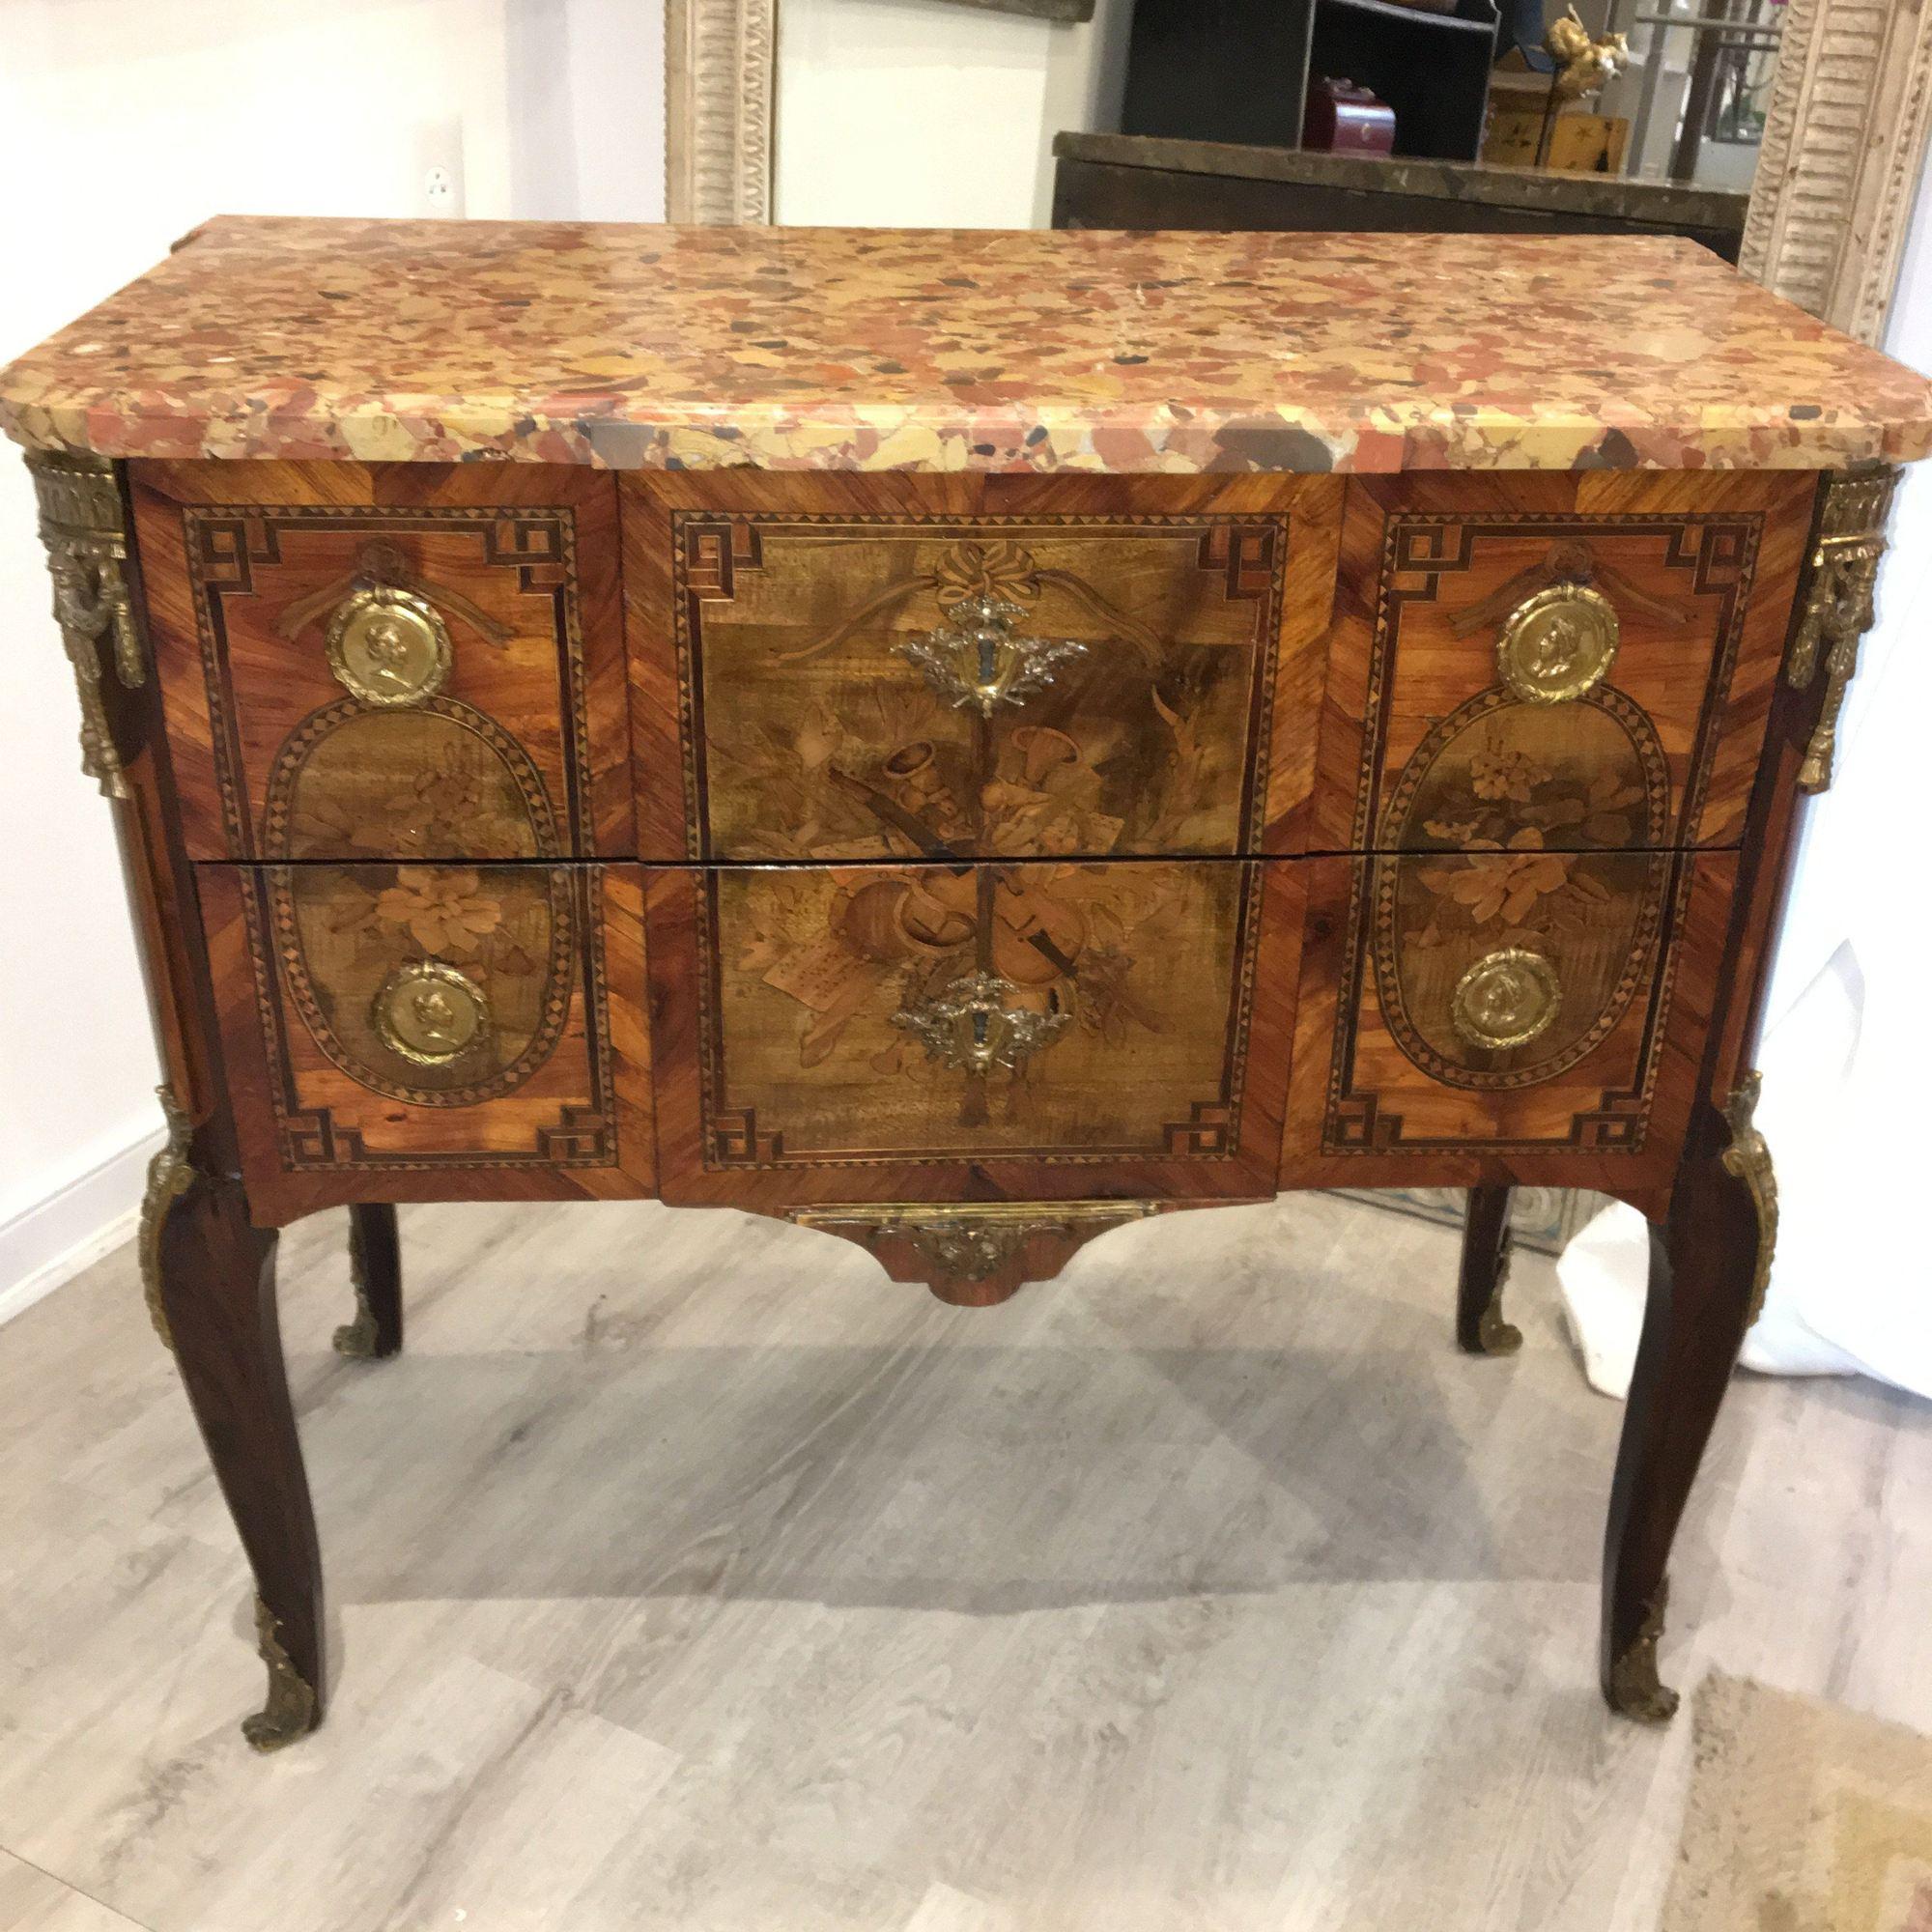 Exquisite 18th century Louis XVI transitional two-drawer commode, made by the Parisian ebonist Francois Rubestuck, circa 1765. Tulip-wood and kingwood having marquetry inlay and medallion cast bronzes, with rare Breche d'Alep marble top. Stamped: